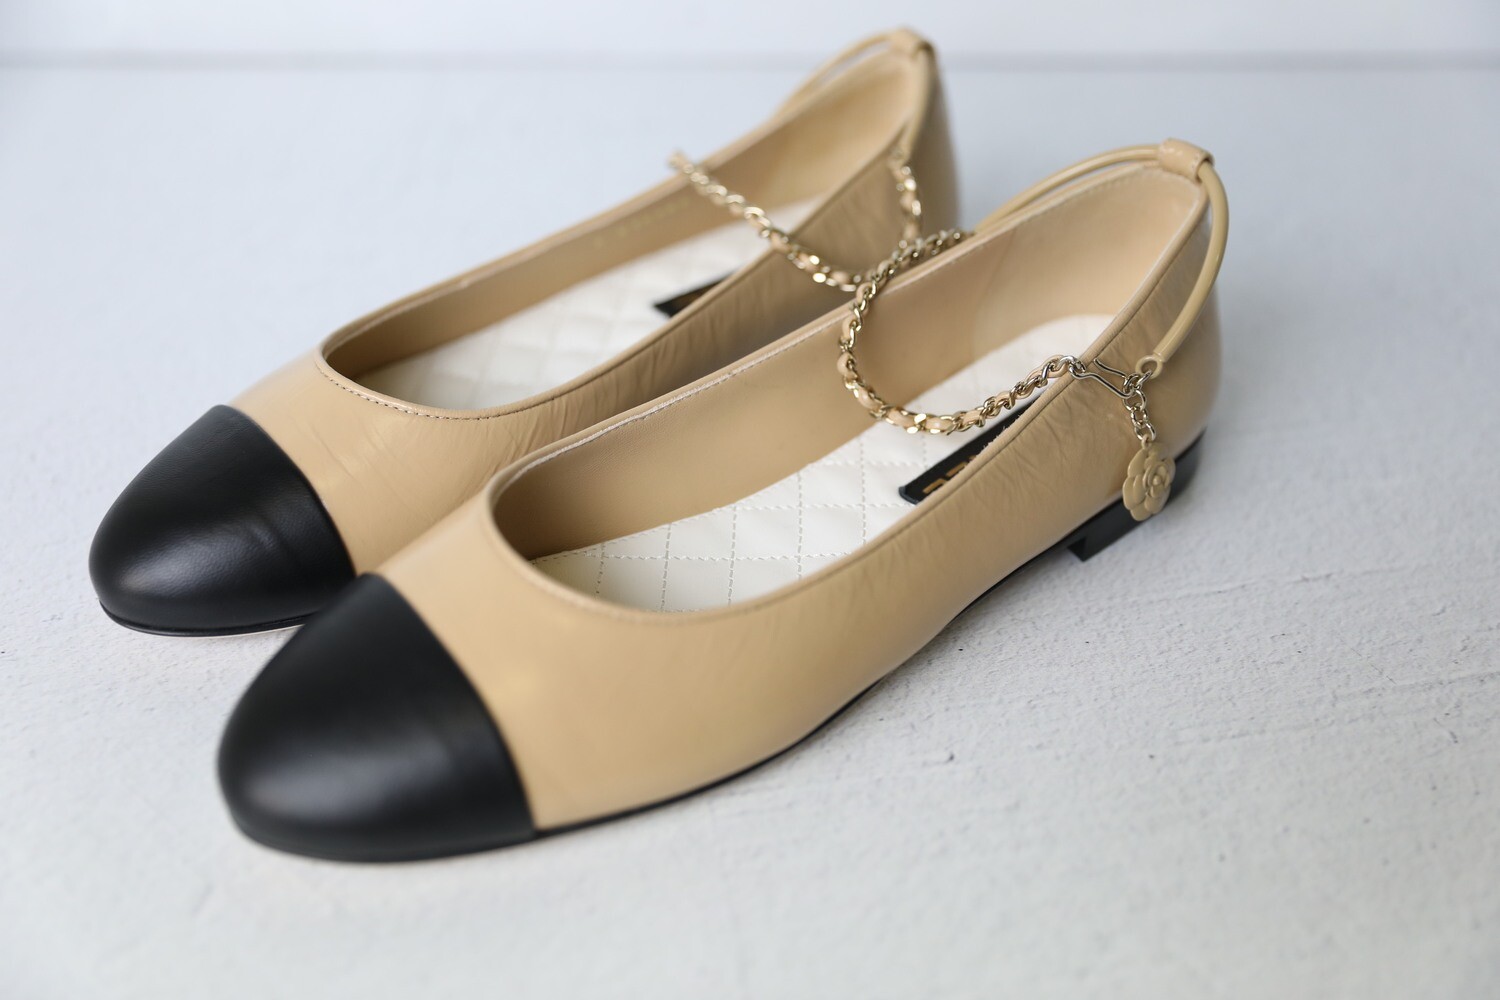 Chanel Shoes Ballet Flats, Black with Gold Captoe, Size 40, New in Box  WA001 - Julia Rose Boston